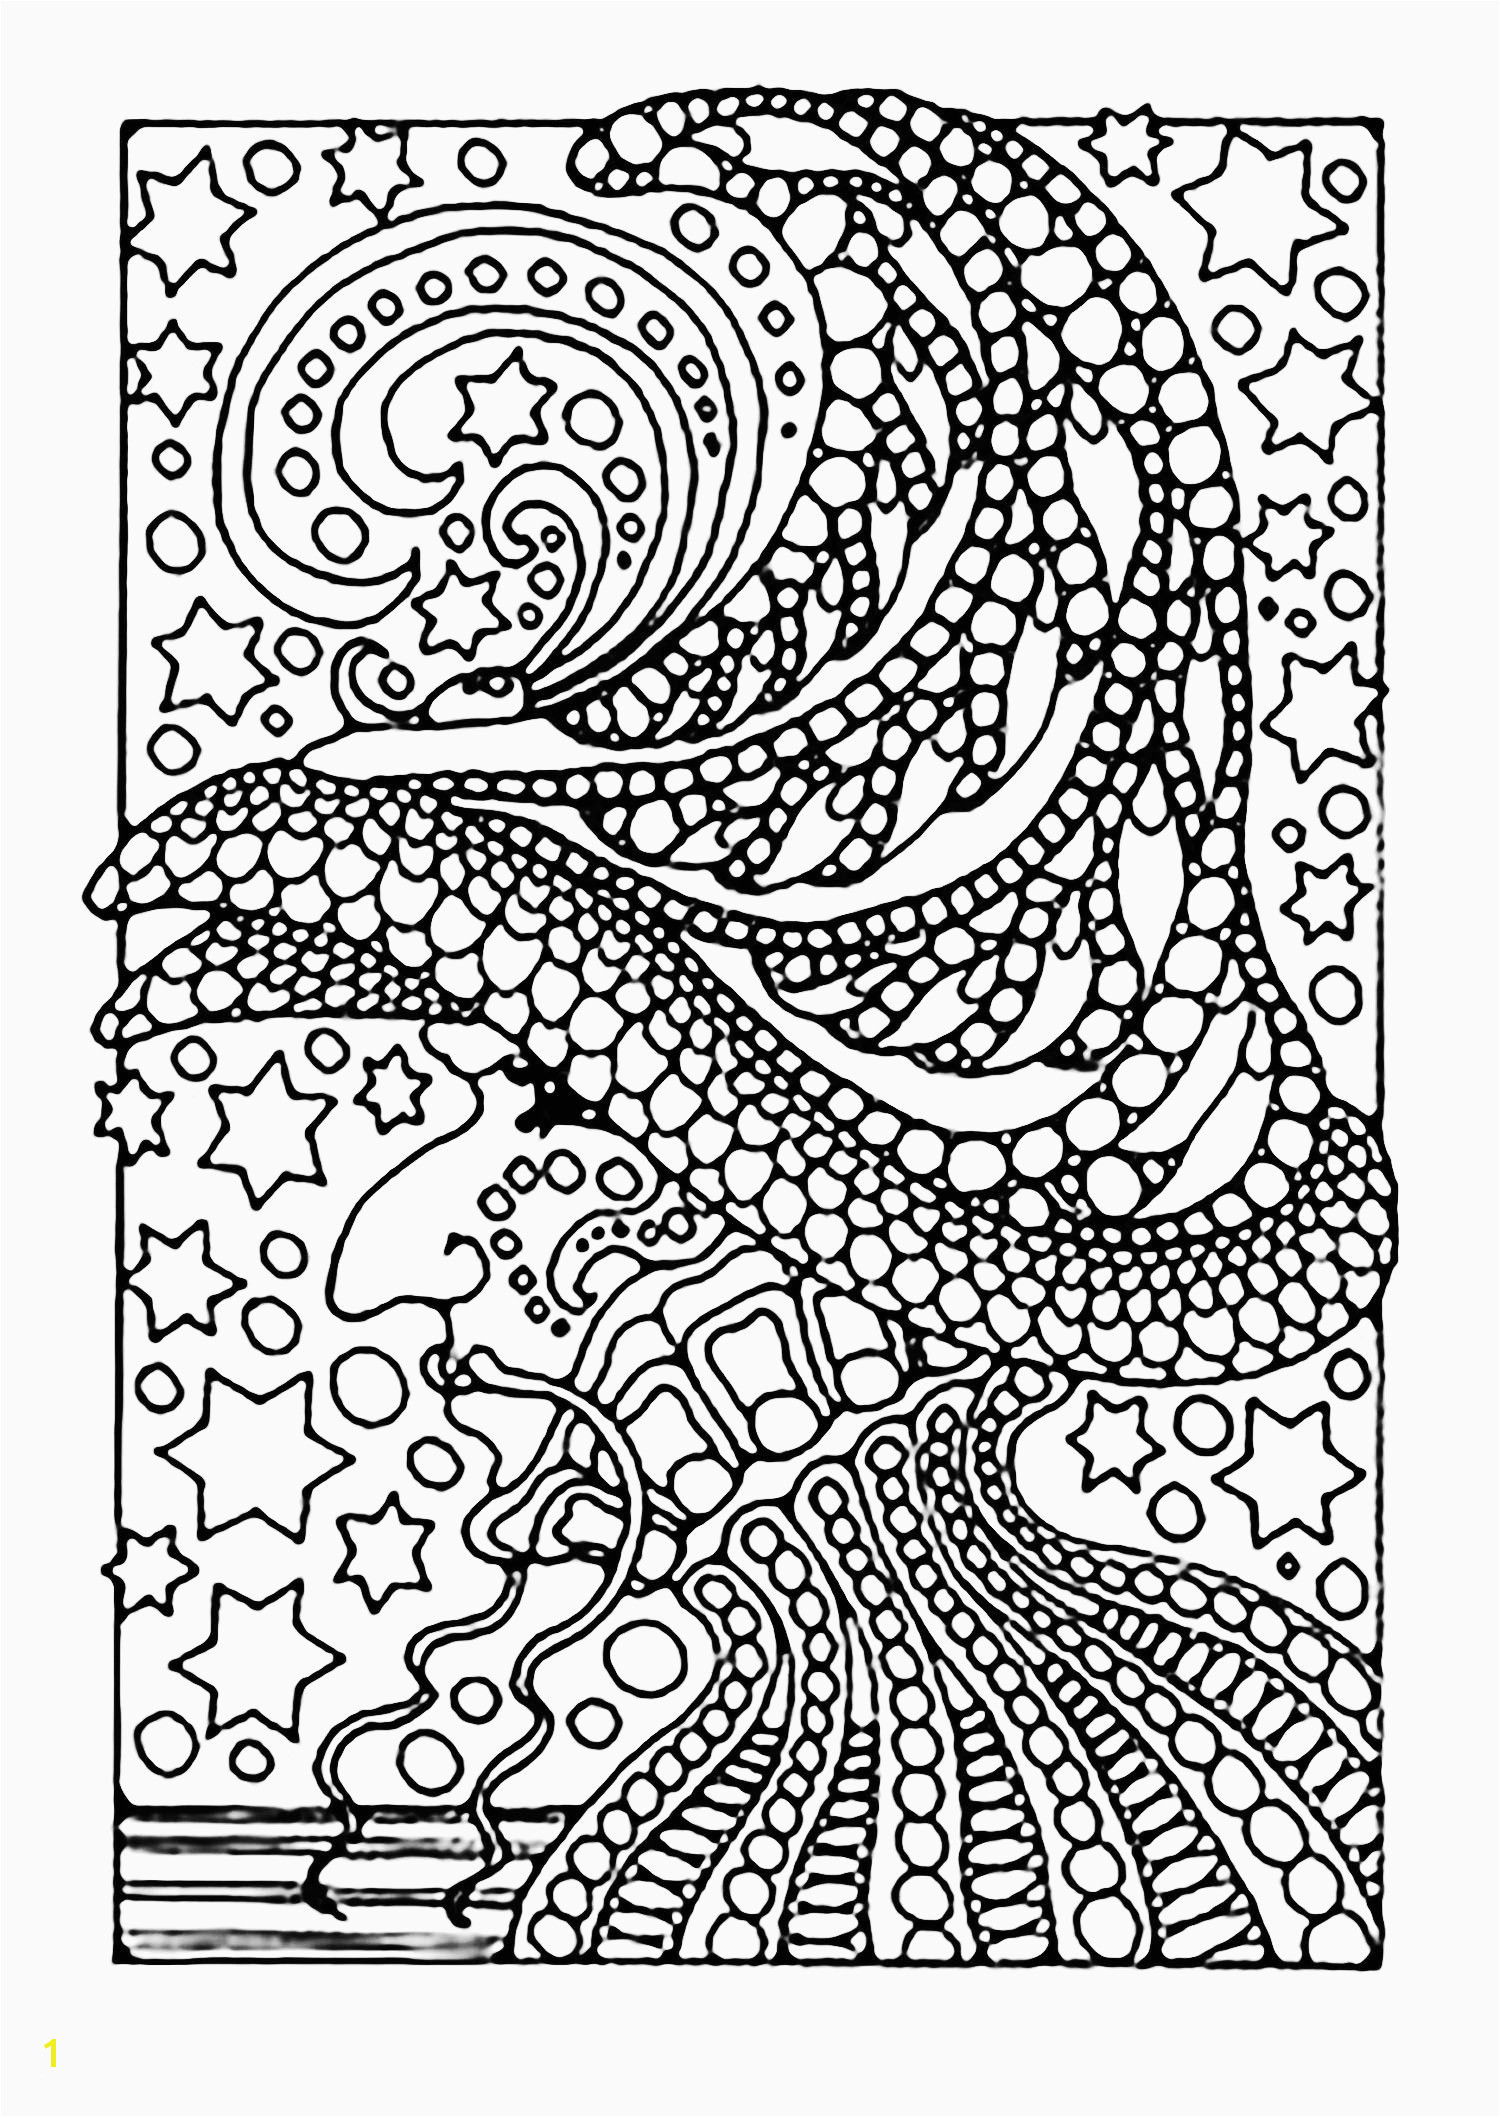 Crayfish Coloring Page Coloring Pages Free Printable Coloring Pages for Children that You